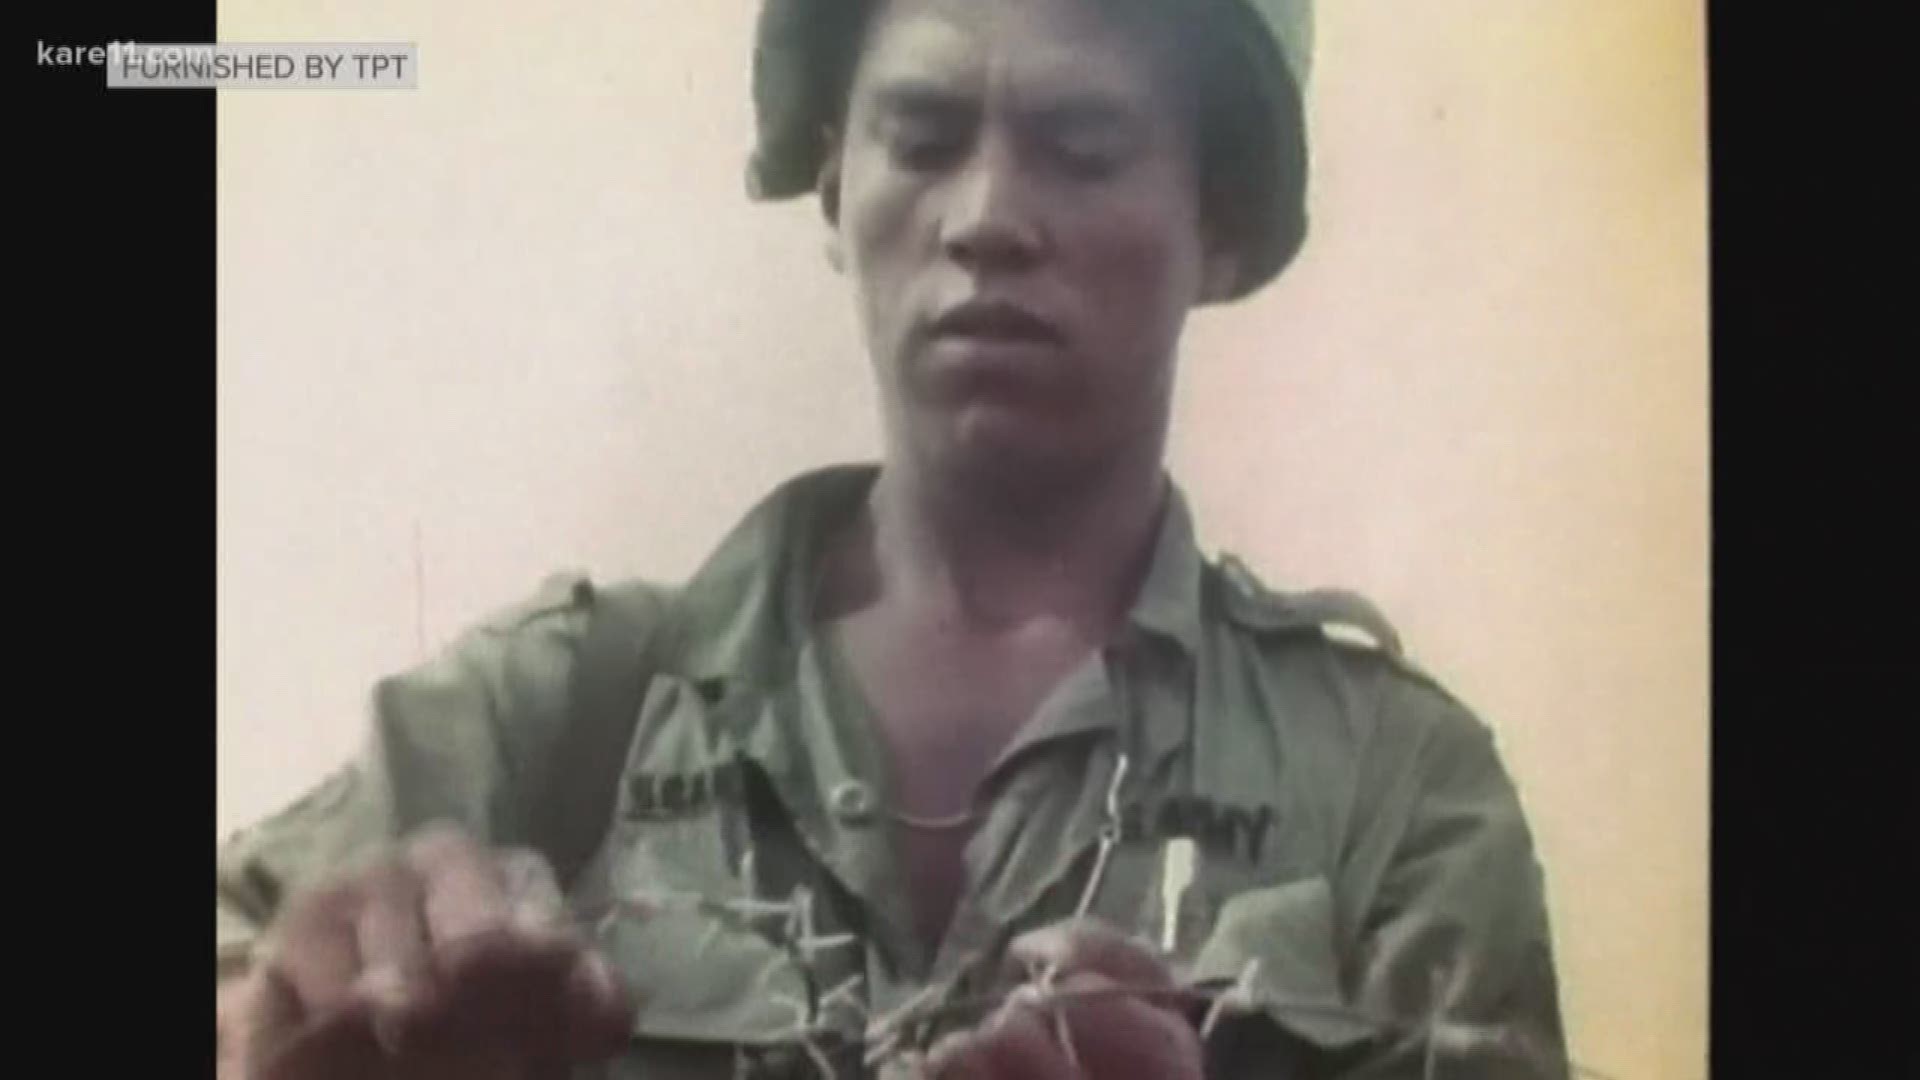 As part of native american heritage month, this November, Twin Cities PBS is highlighting native cultures with special events and programming. Specifically, a documentary that centers around the experience of Native Americans who served in Vietnam.